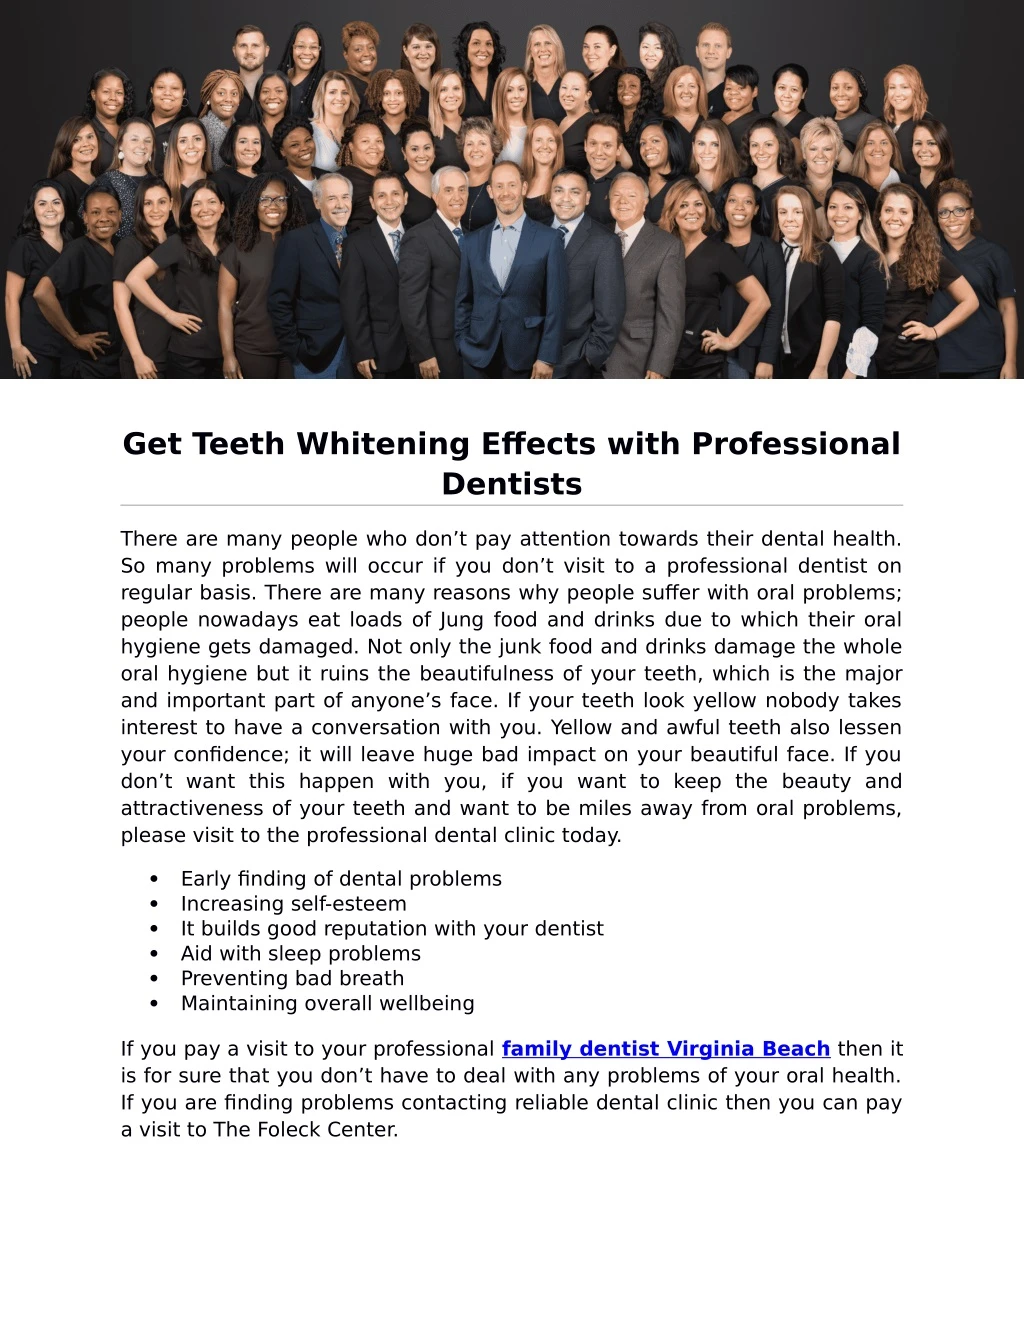 get teeth whitening effects with professional